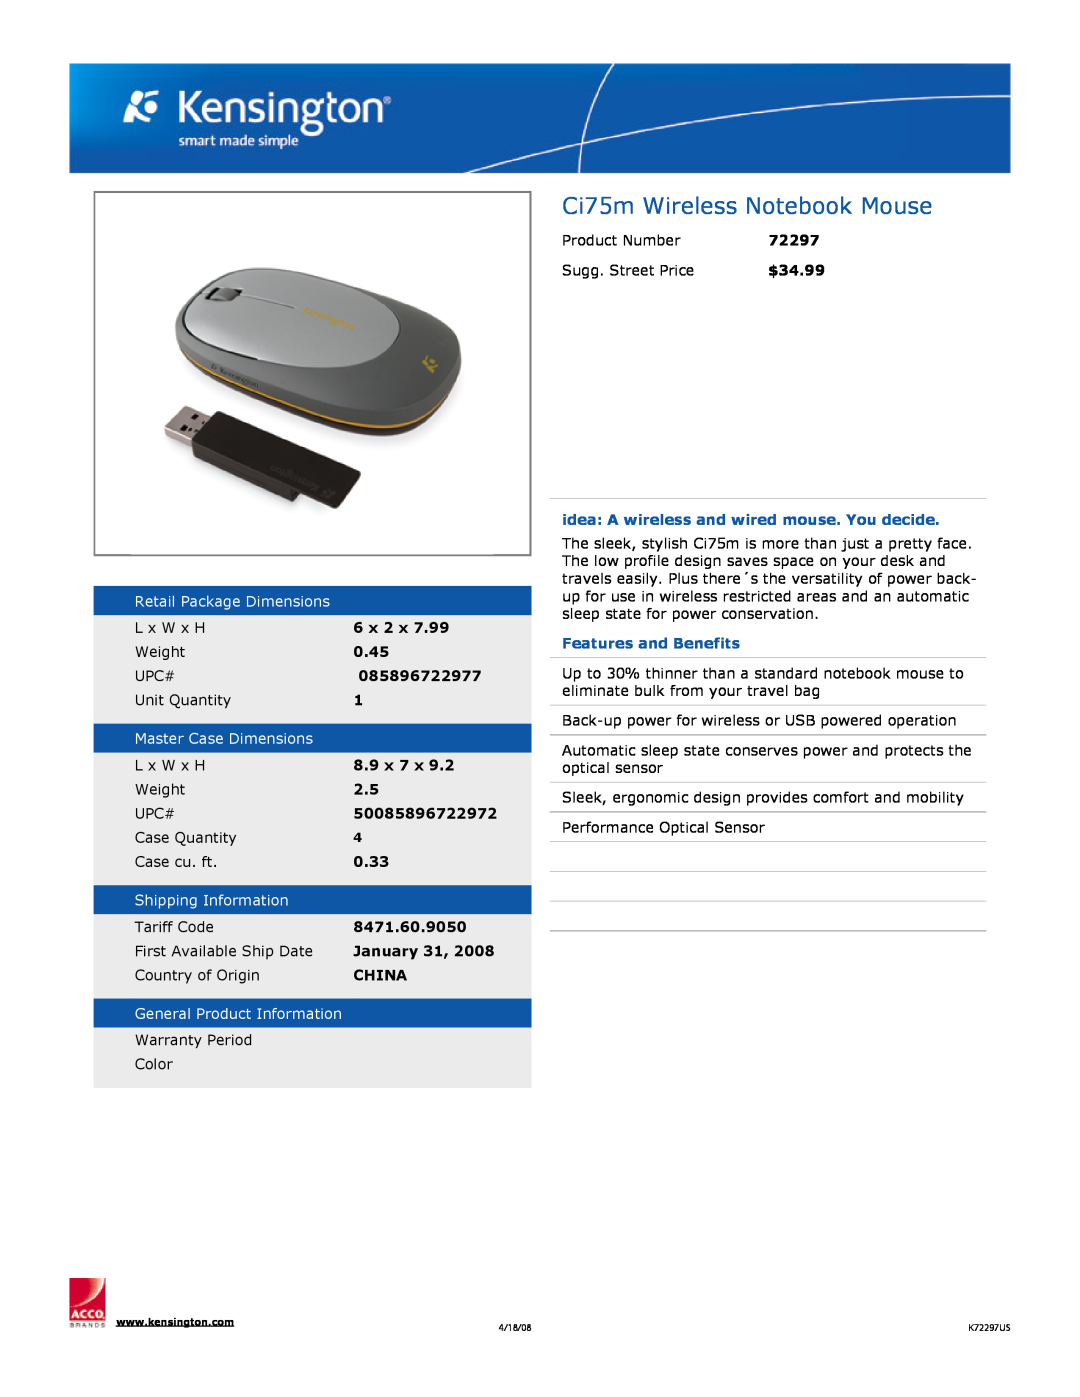 Kensington dimensions Ci75m Wireless Notebook Mouse, Retail Package Dimensions, 085896722977, Master Case Dimensions 